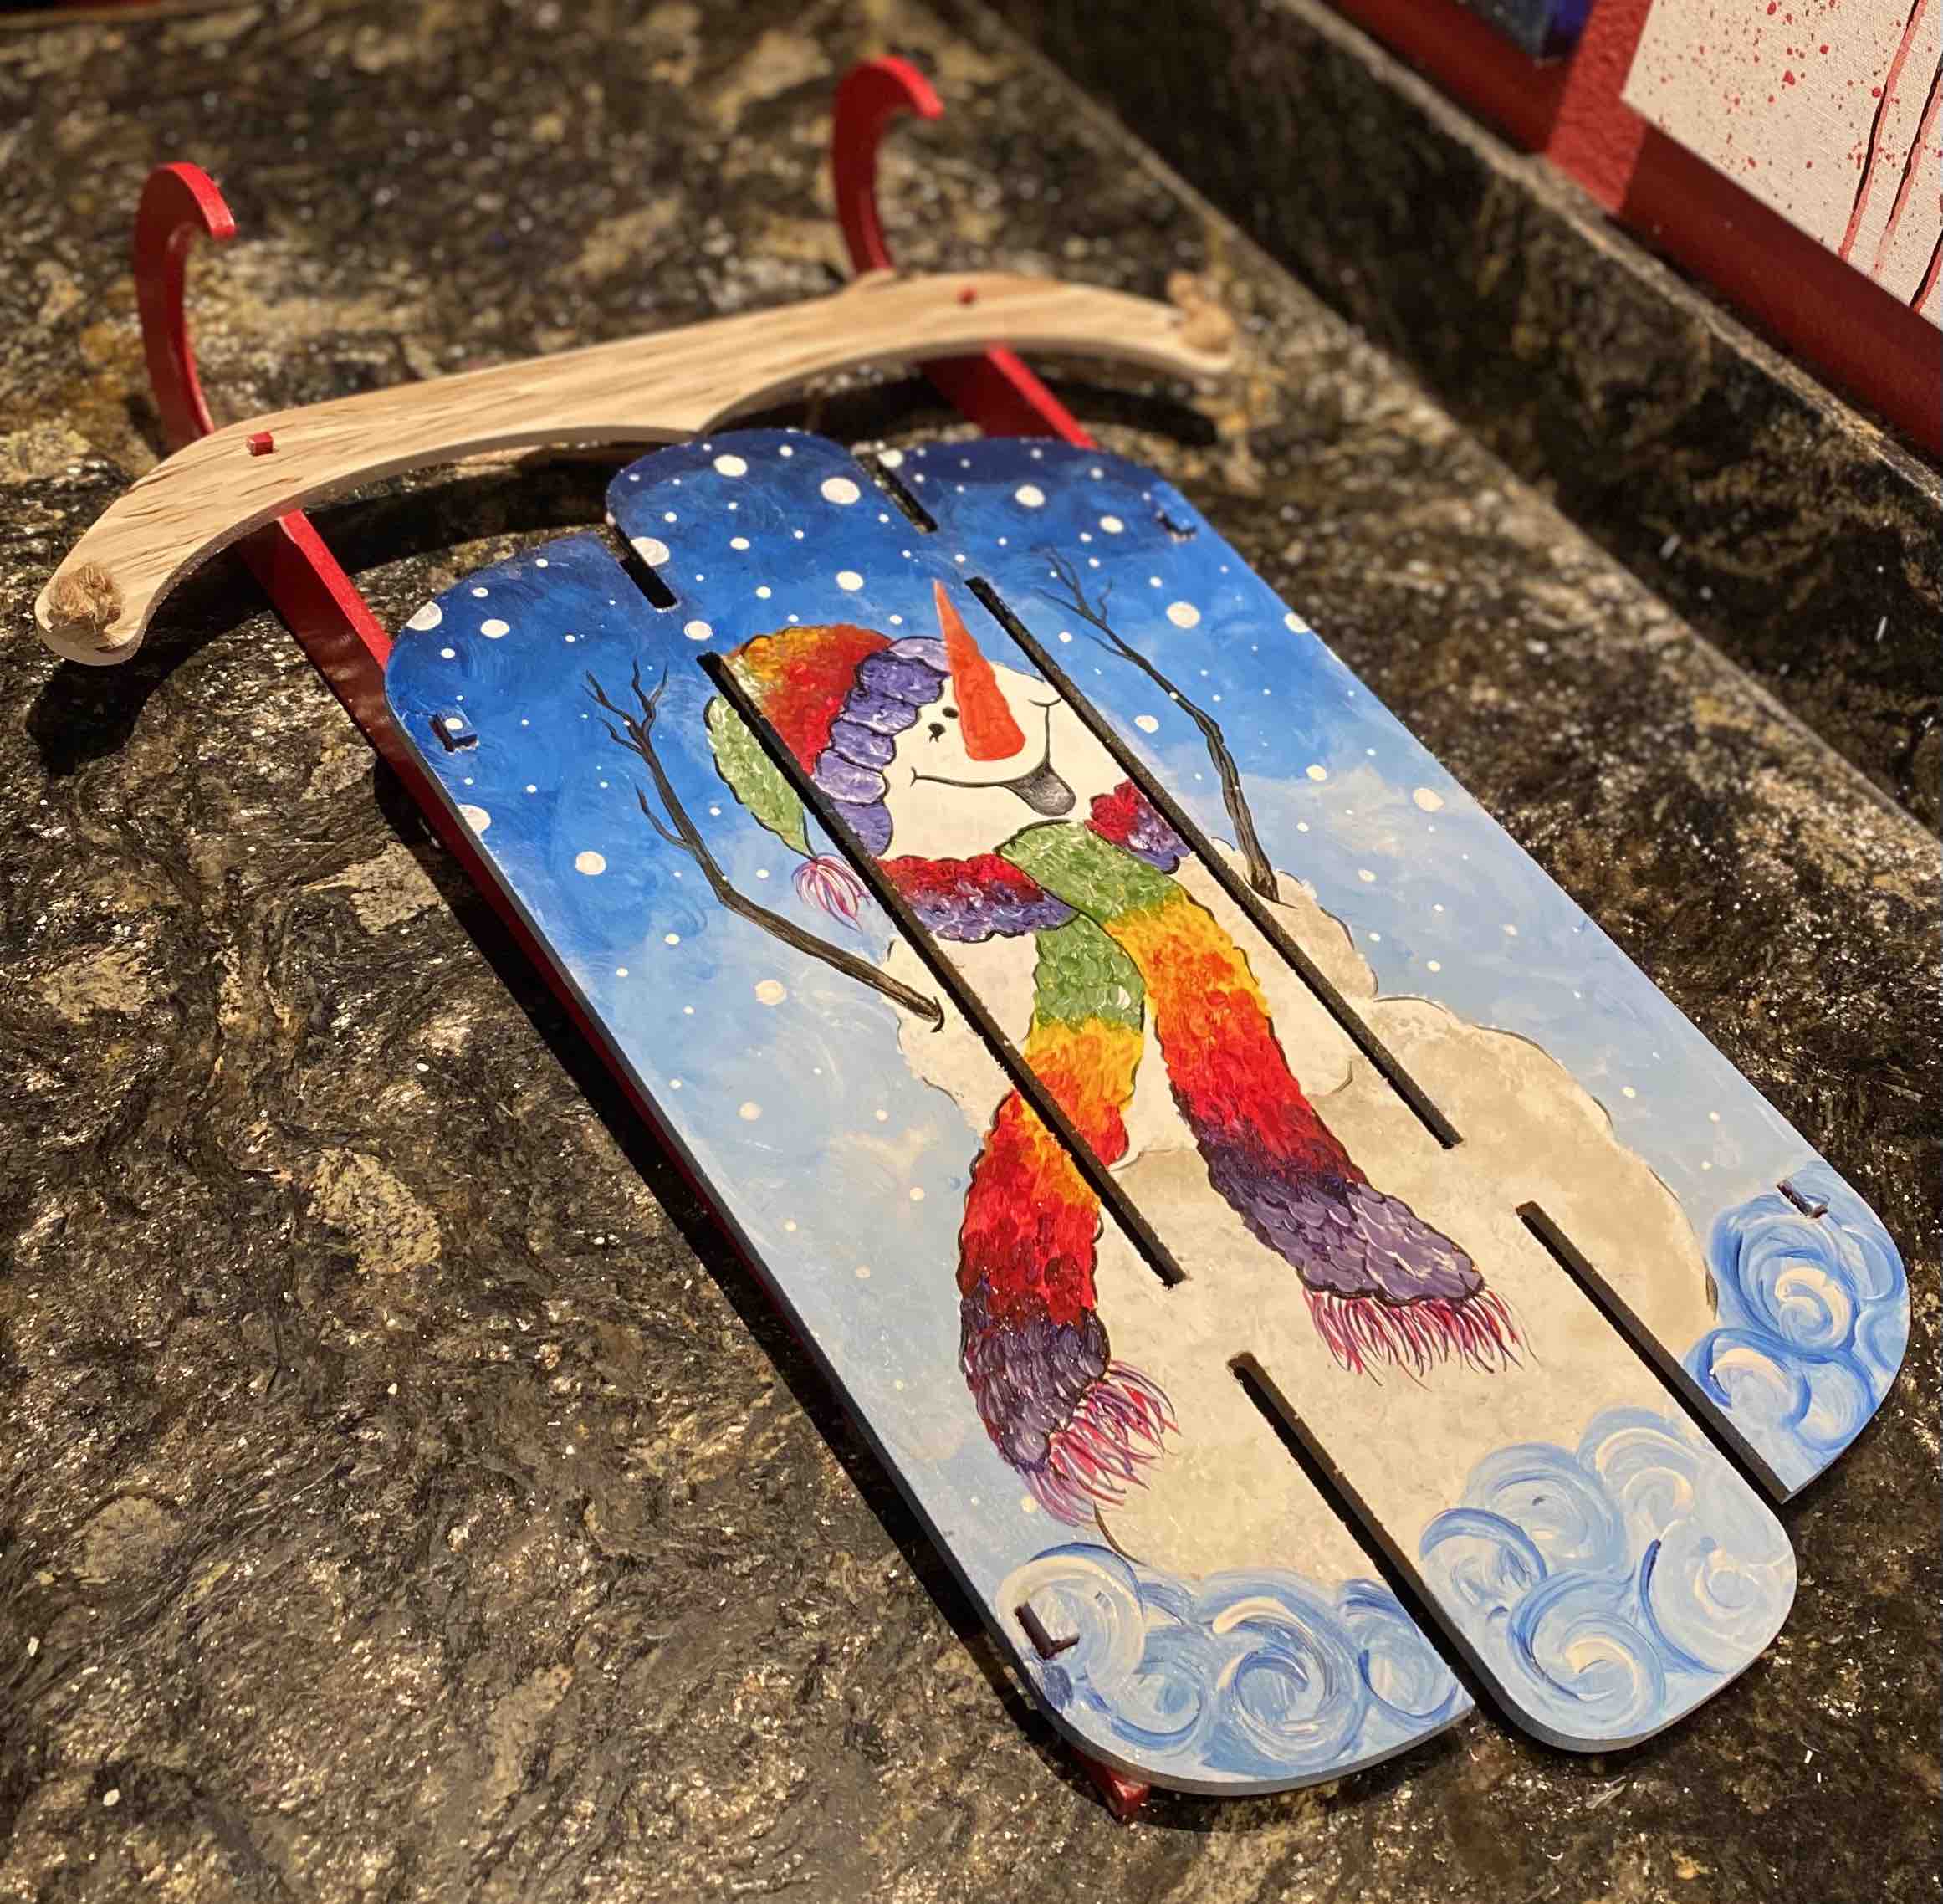 Snowman Sled Build and Paint